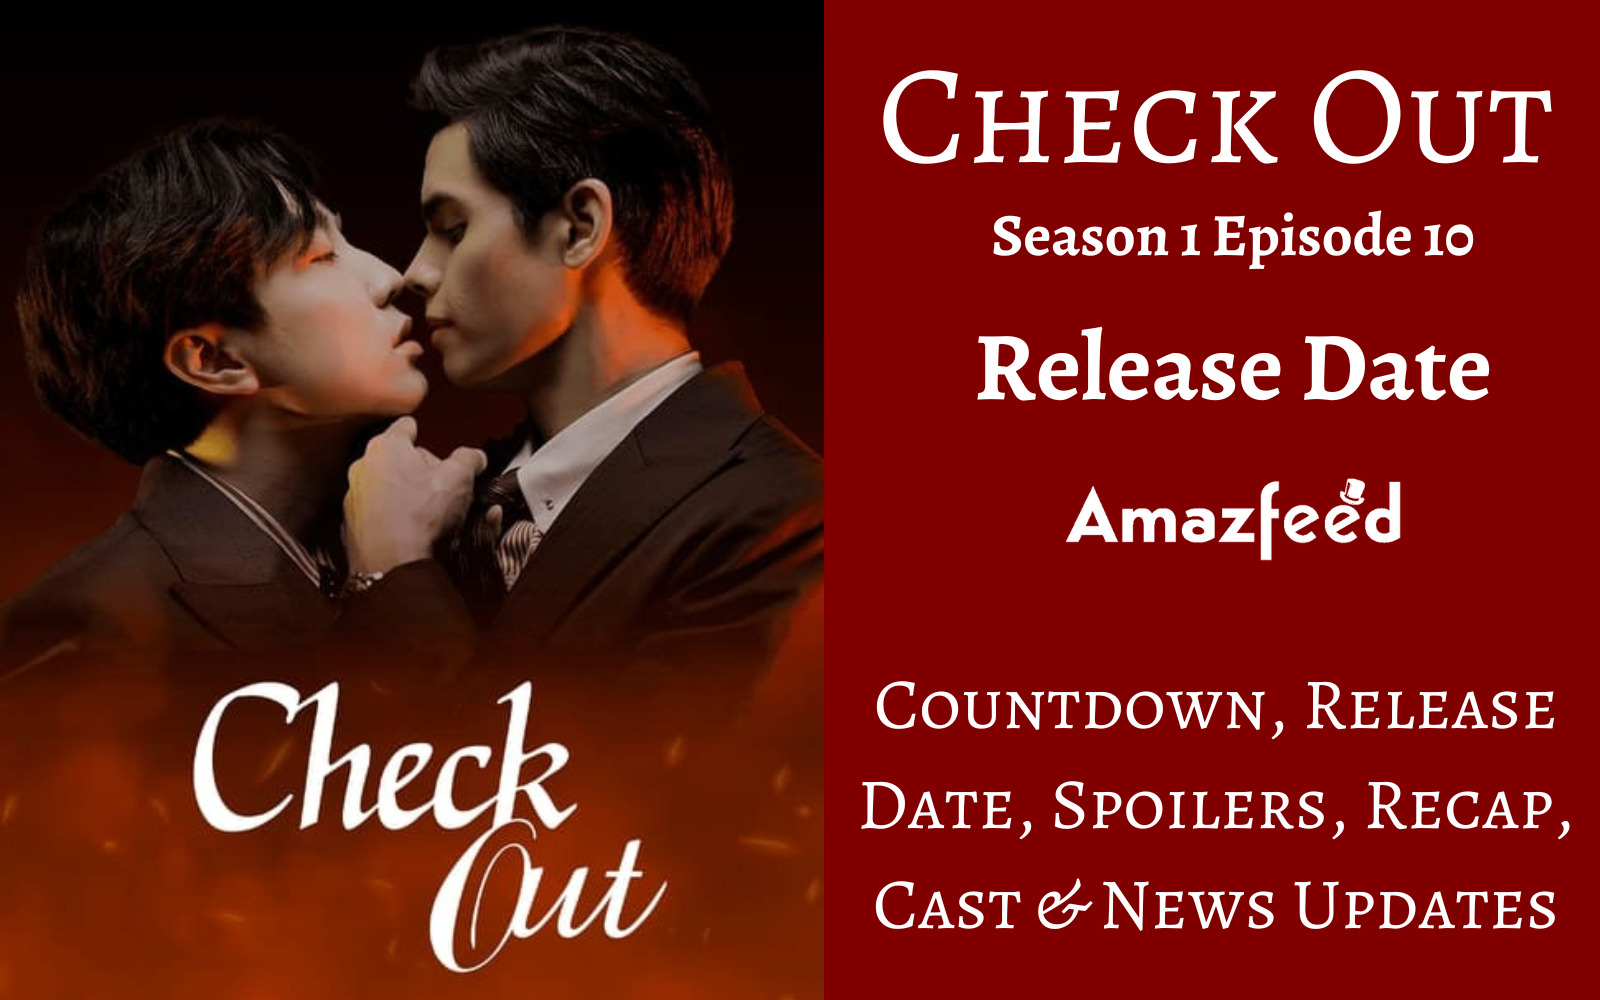 Check Out Season 1 Episode 10 Release Date